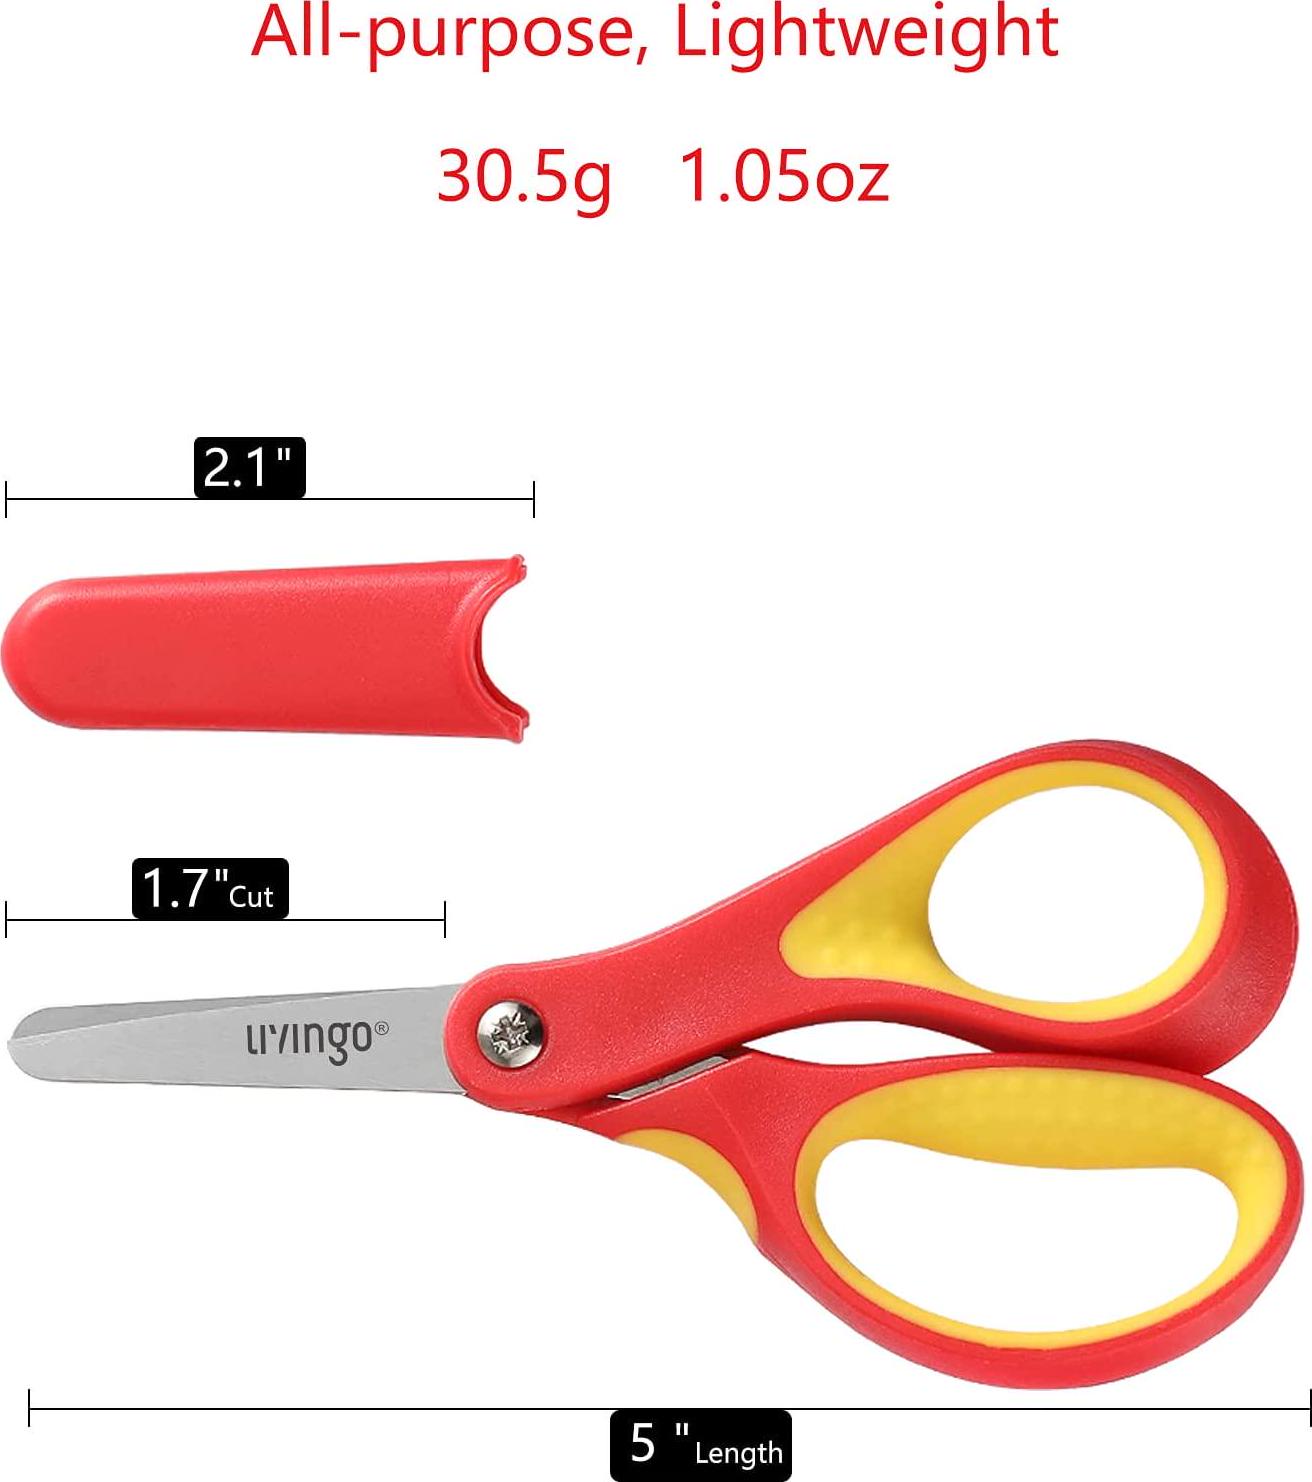 LIVINGO, LIVINGO 5 Small School Student Blunt Tip Kids Craft Scissors, Sharp Stainless Steel Blades Safety Soft Grip Handles for Children Cutting Paper, Assorted Color, 3 Pack(12.7cm)